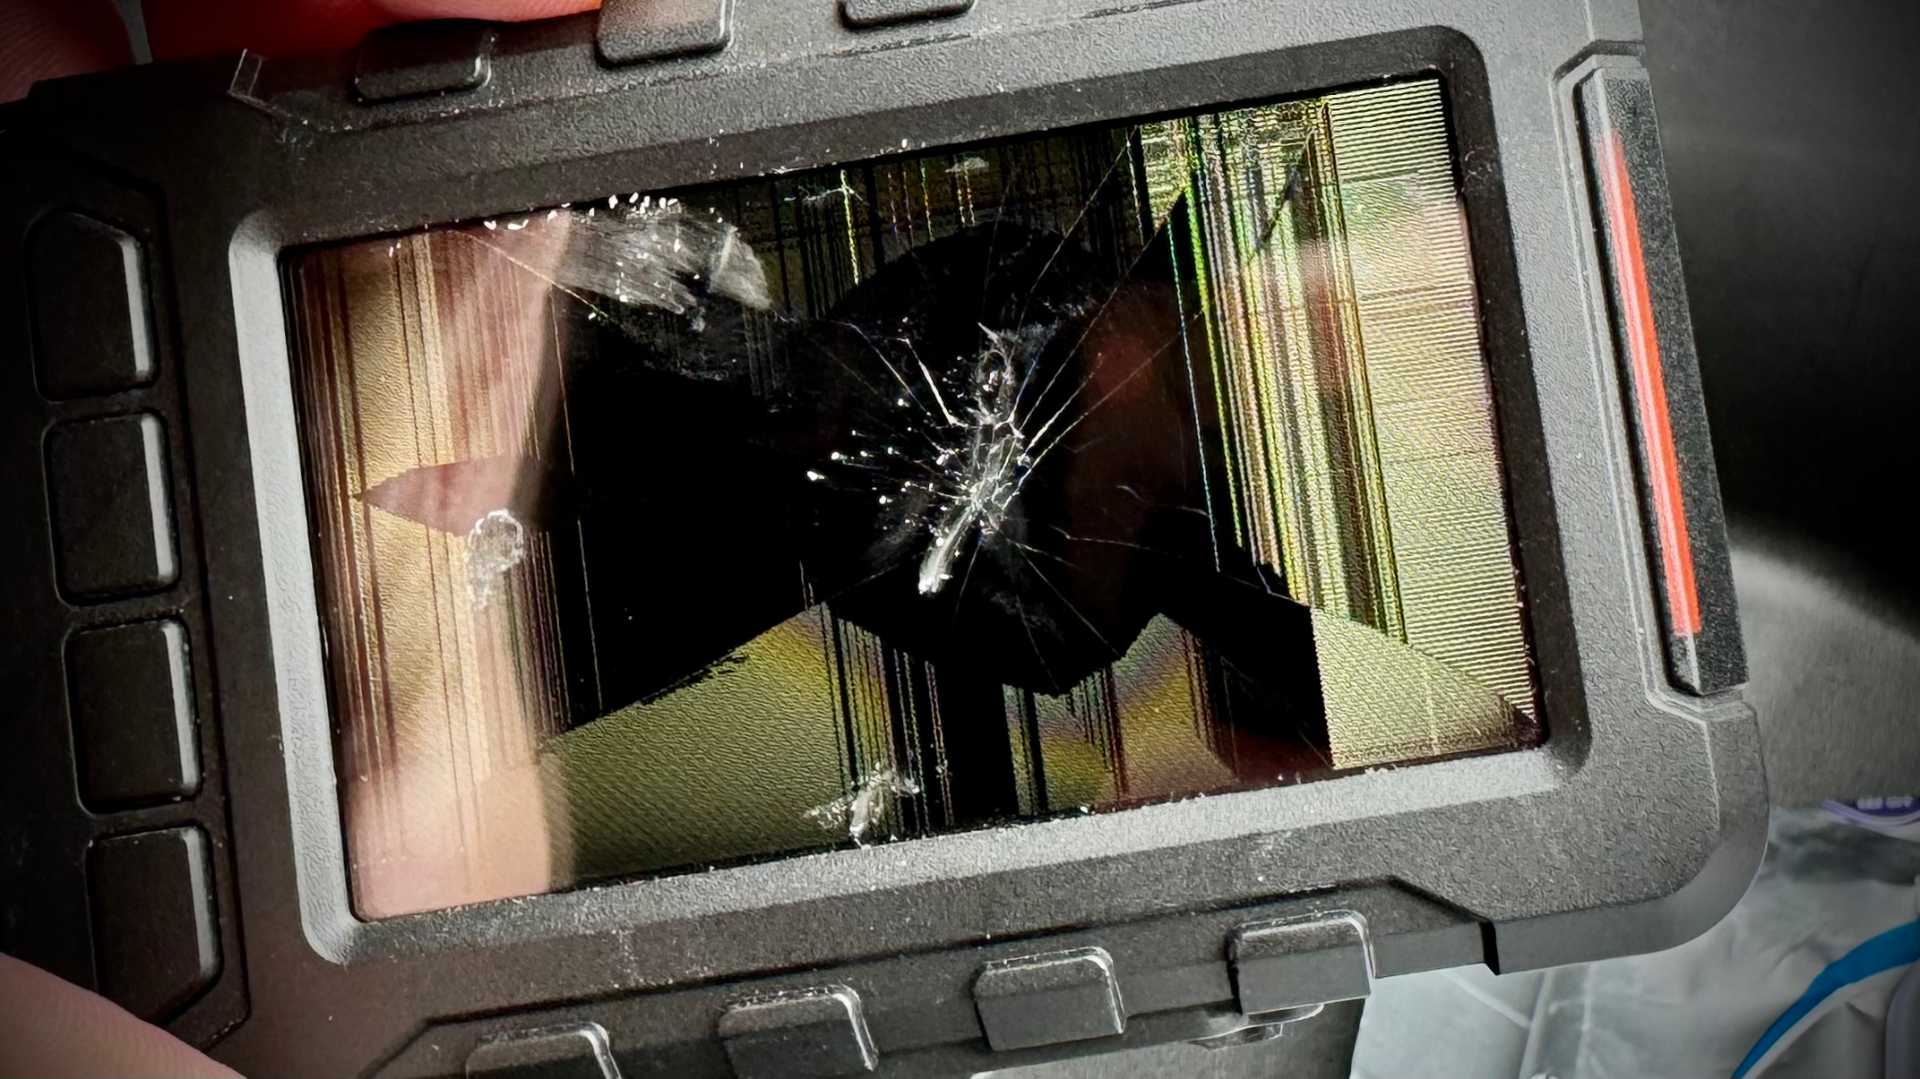 A motorcycle dashcam recording module with a smashed screen.